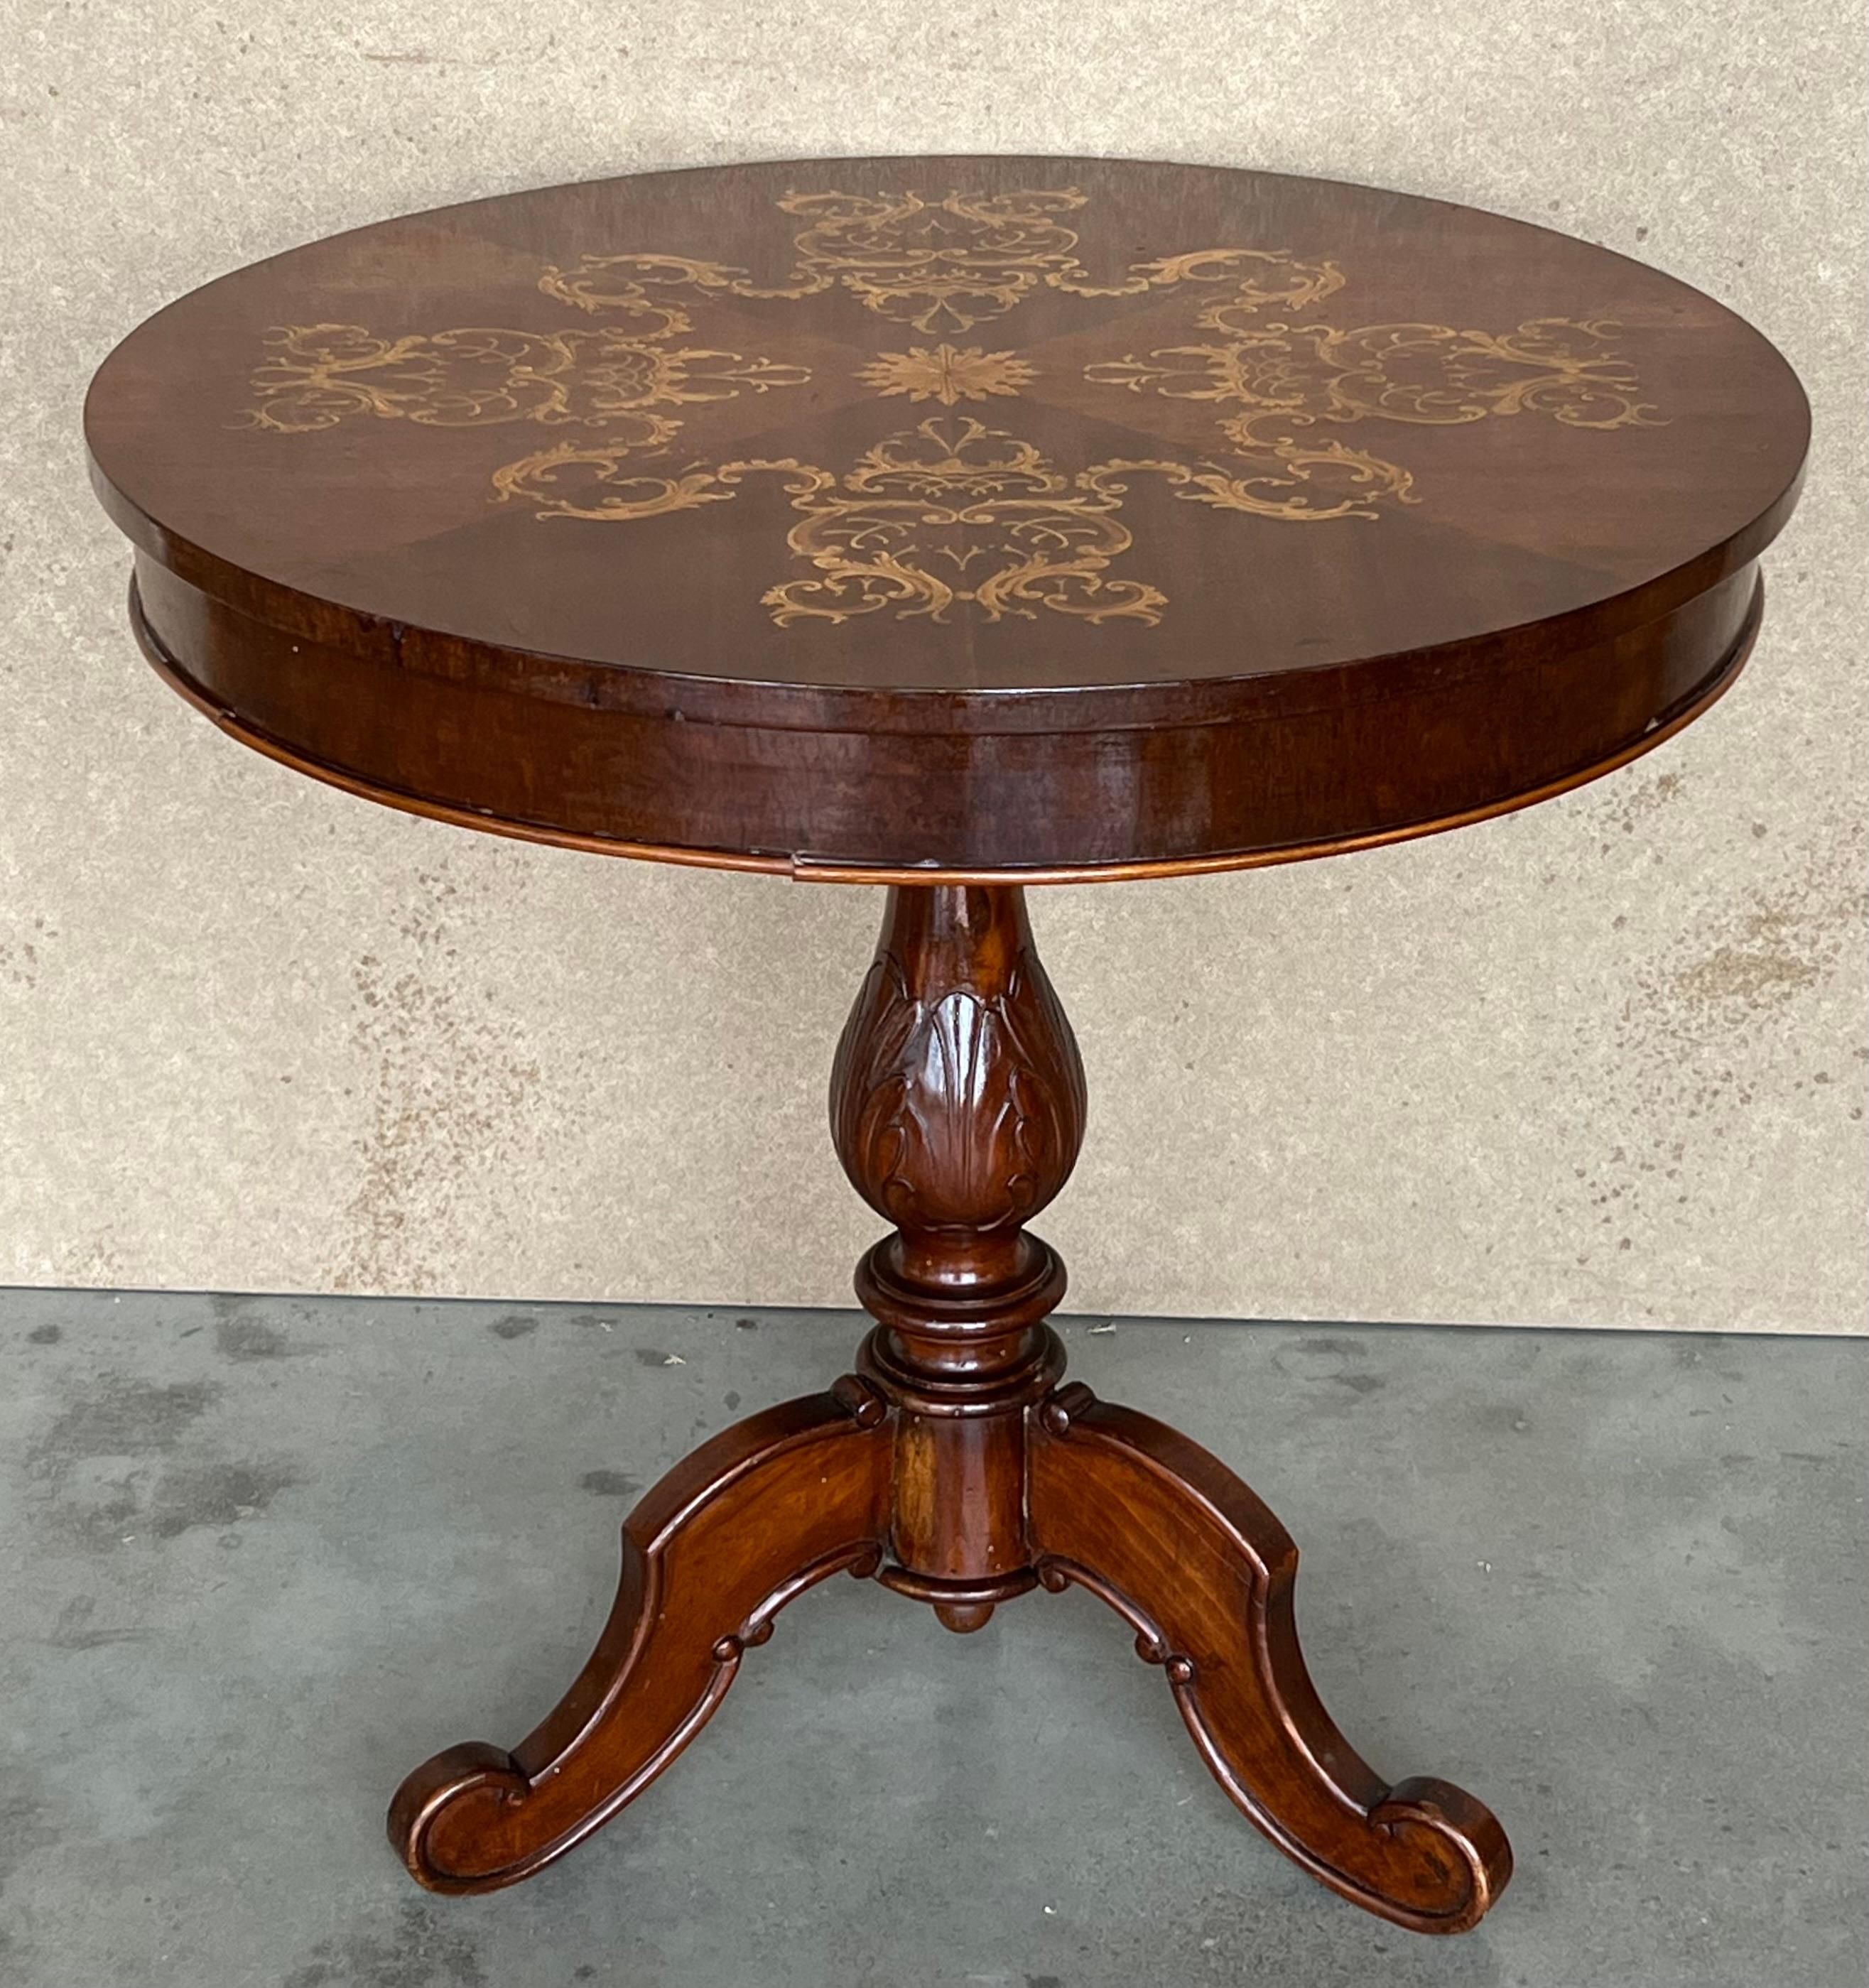 This Italian round pedestal wooden table from the mid to late 19th century features an exquisite floral marquetry motif inlay on the top, surrounded by a sectional motif in the surround. The apron echoes the decorative banding found on the edge of